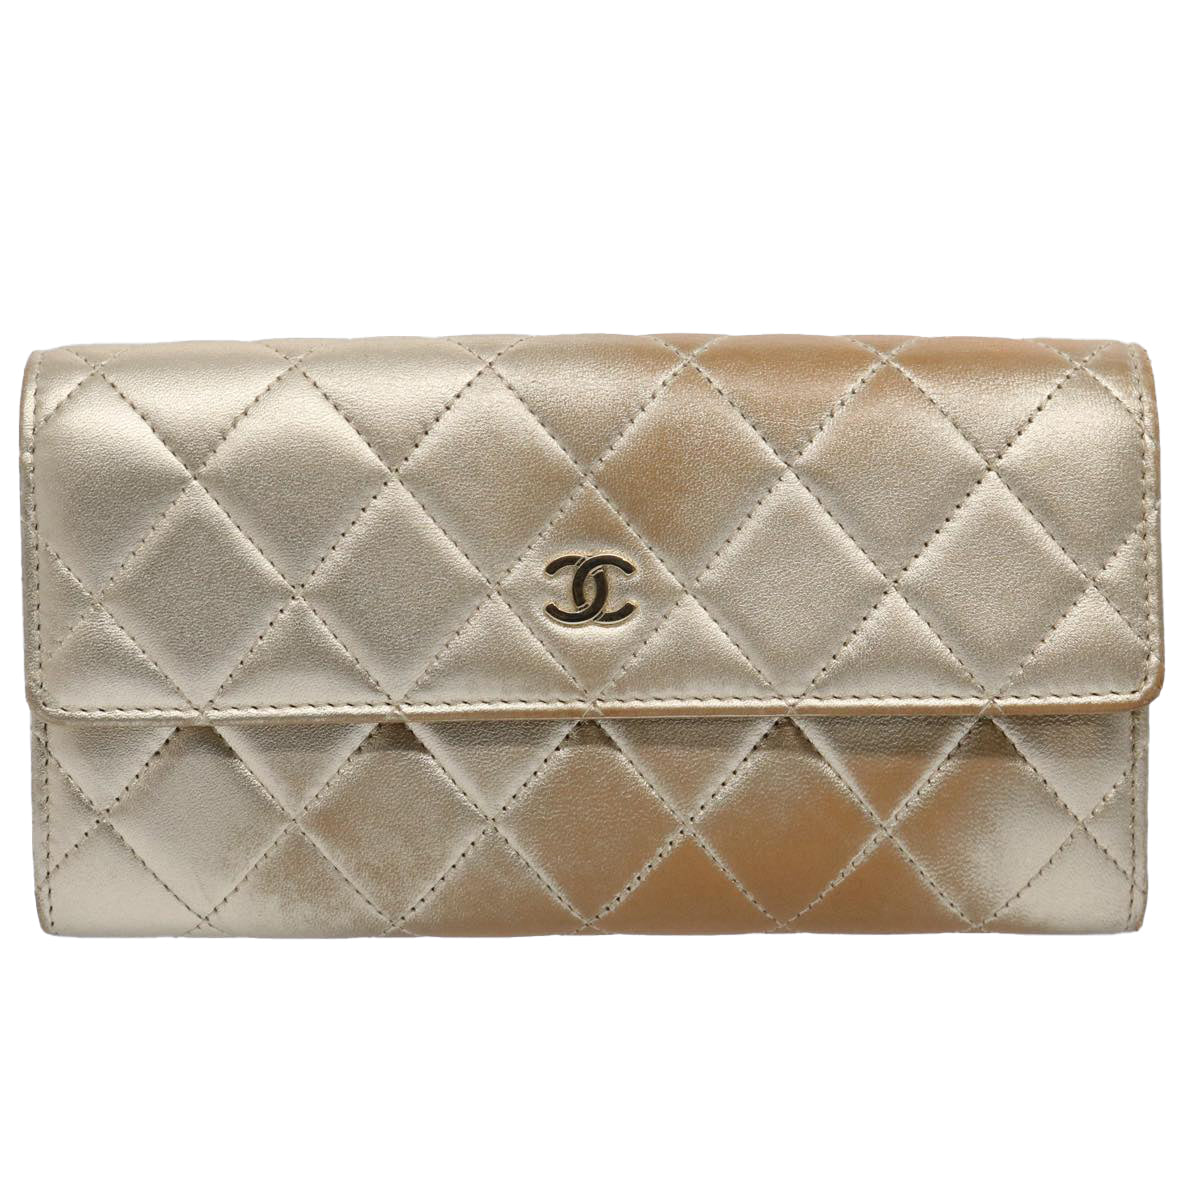 CHANEL Long Wallet Lamb Skin Gold Tone CC Auth bs10438